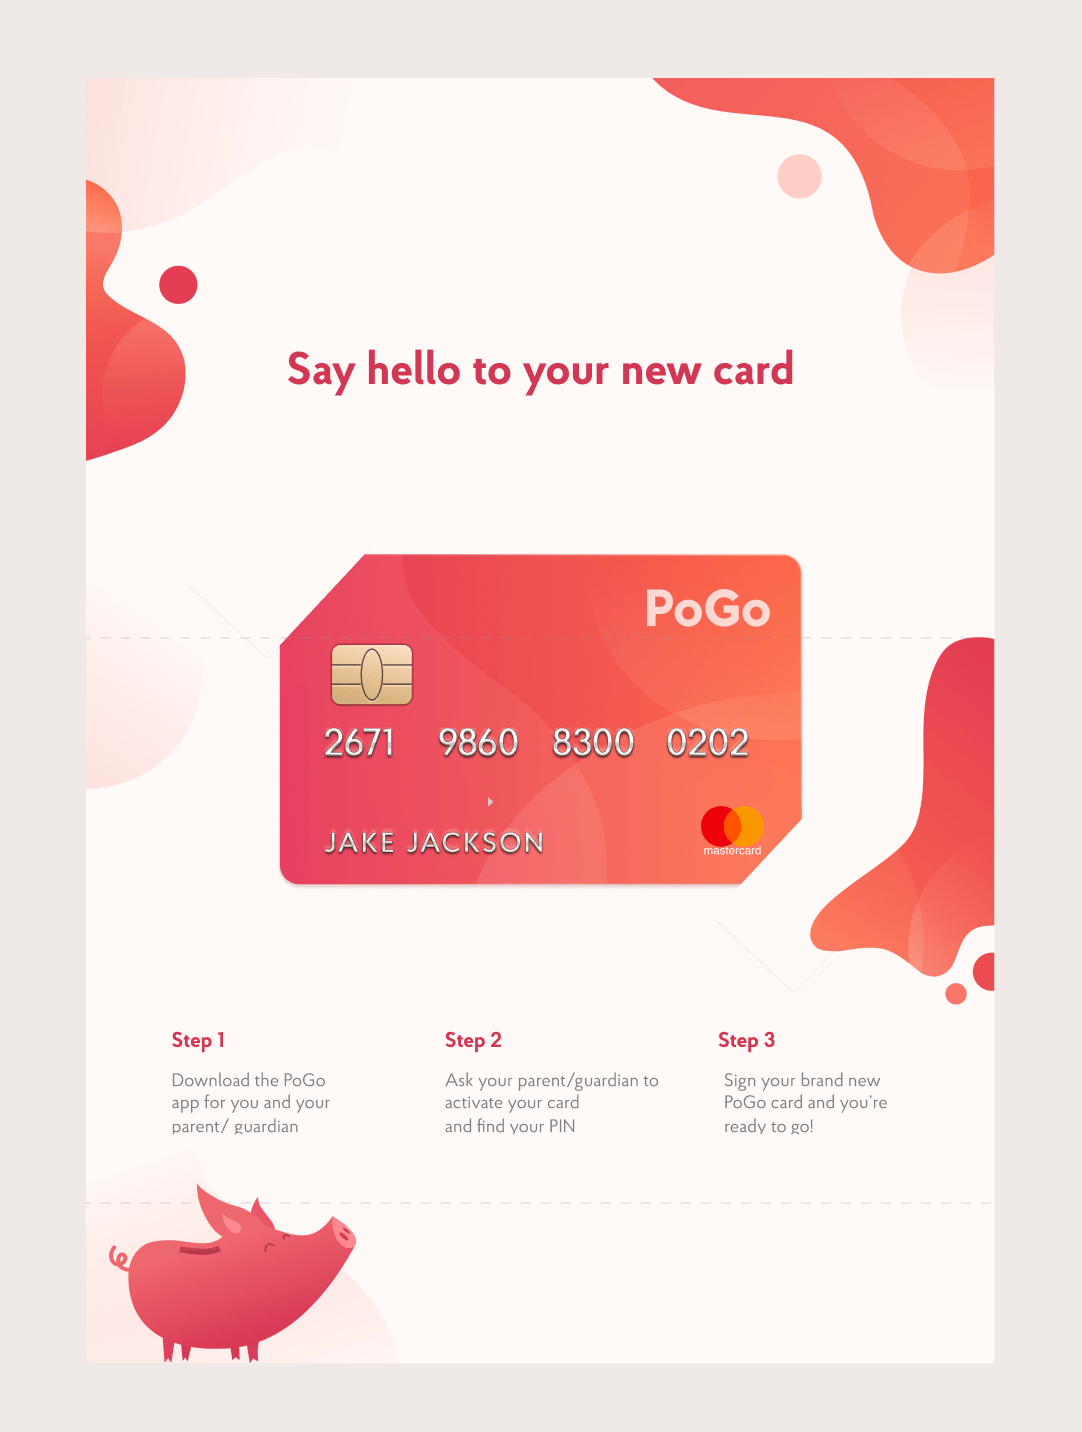 Design for the PoGo card welcome pack